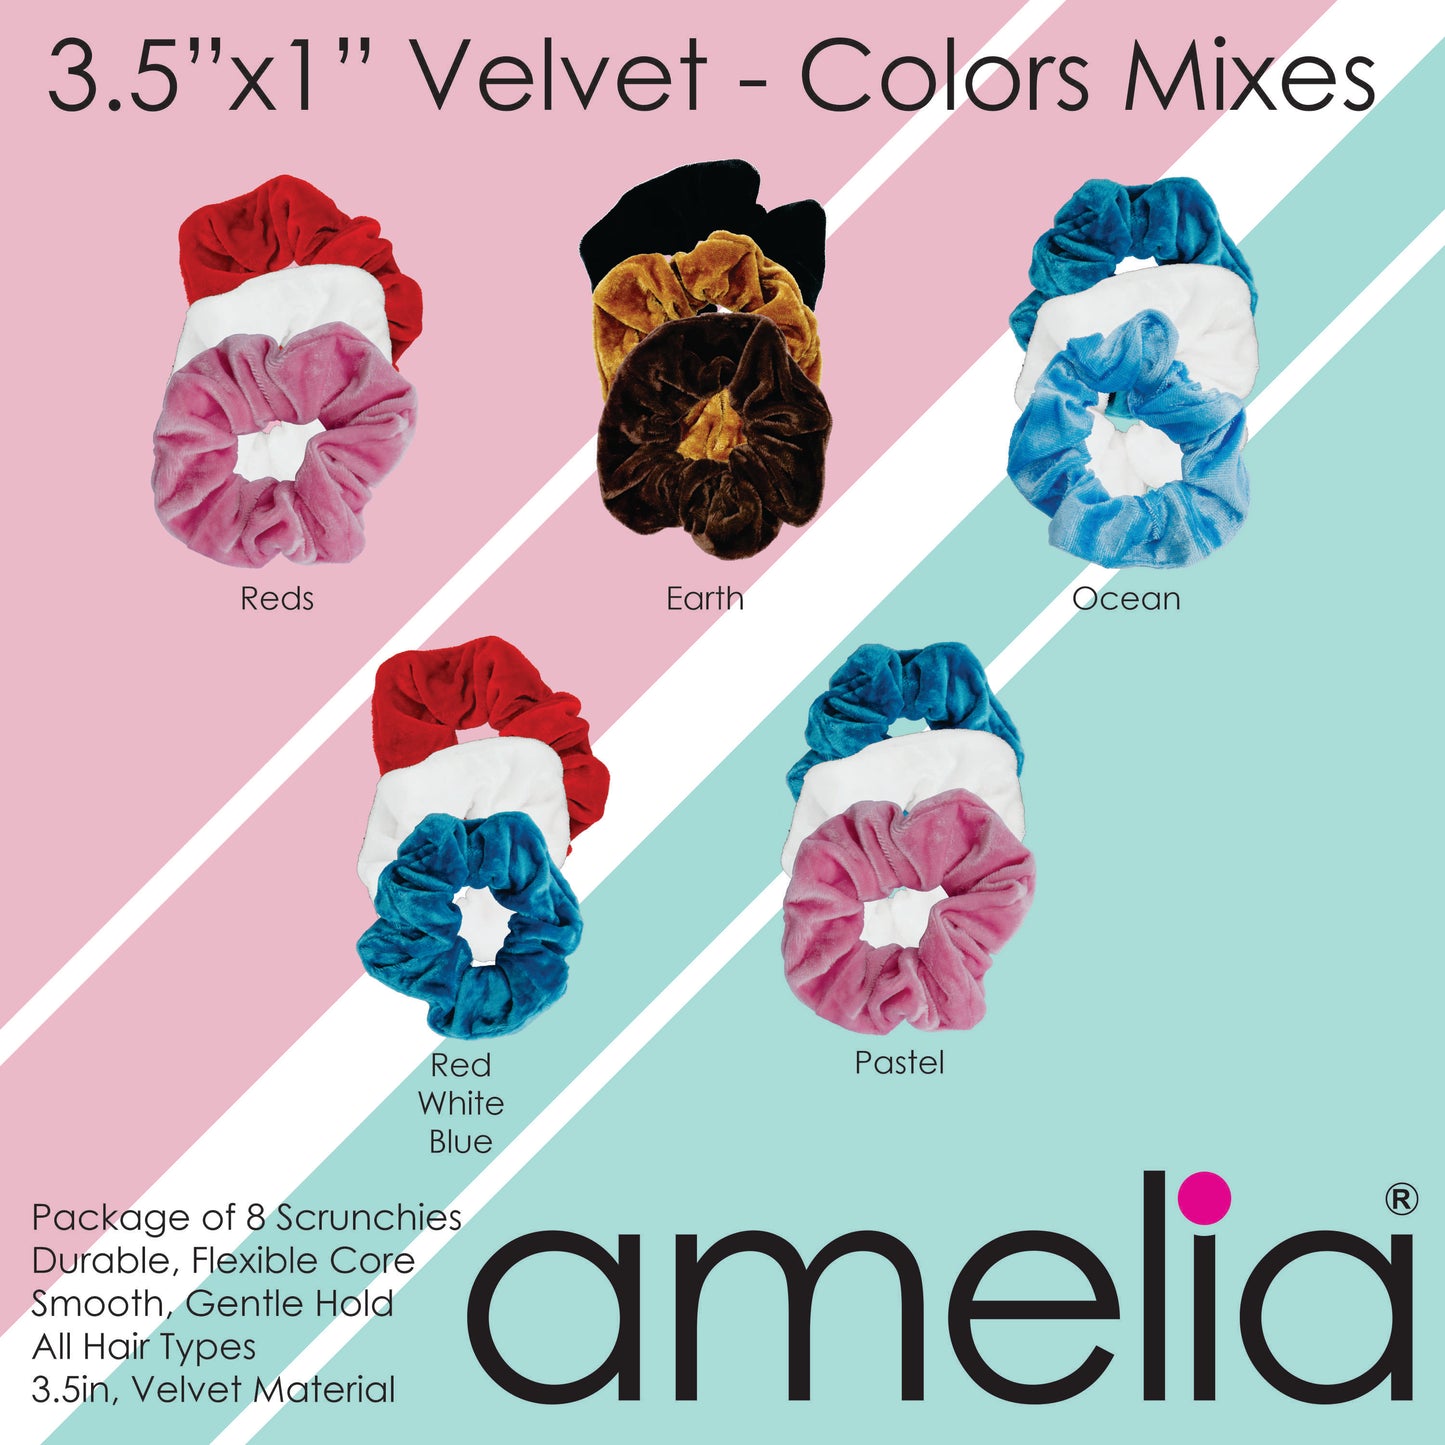 Amelia Beauty, Pink Velvet Scrunchies, 3.5in Diameter, Gentle on Hair, Strong Hold, No Snag, No Dents or Creases. 8 Pack